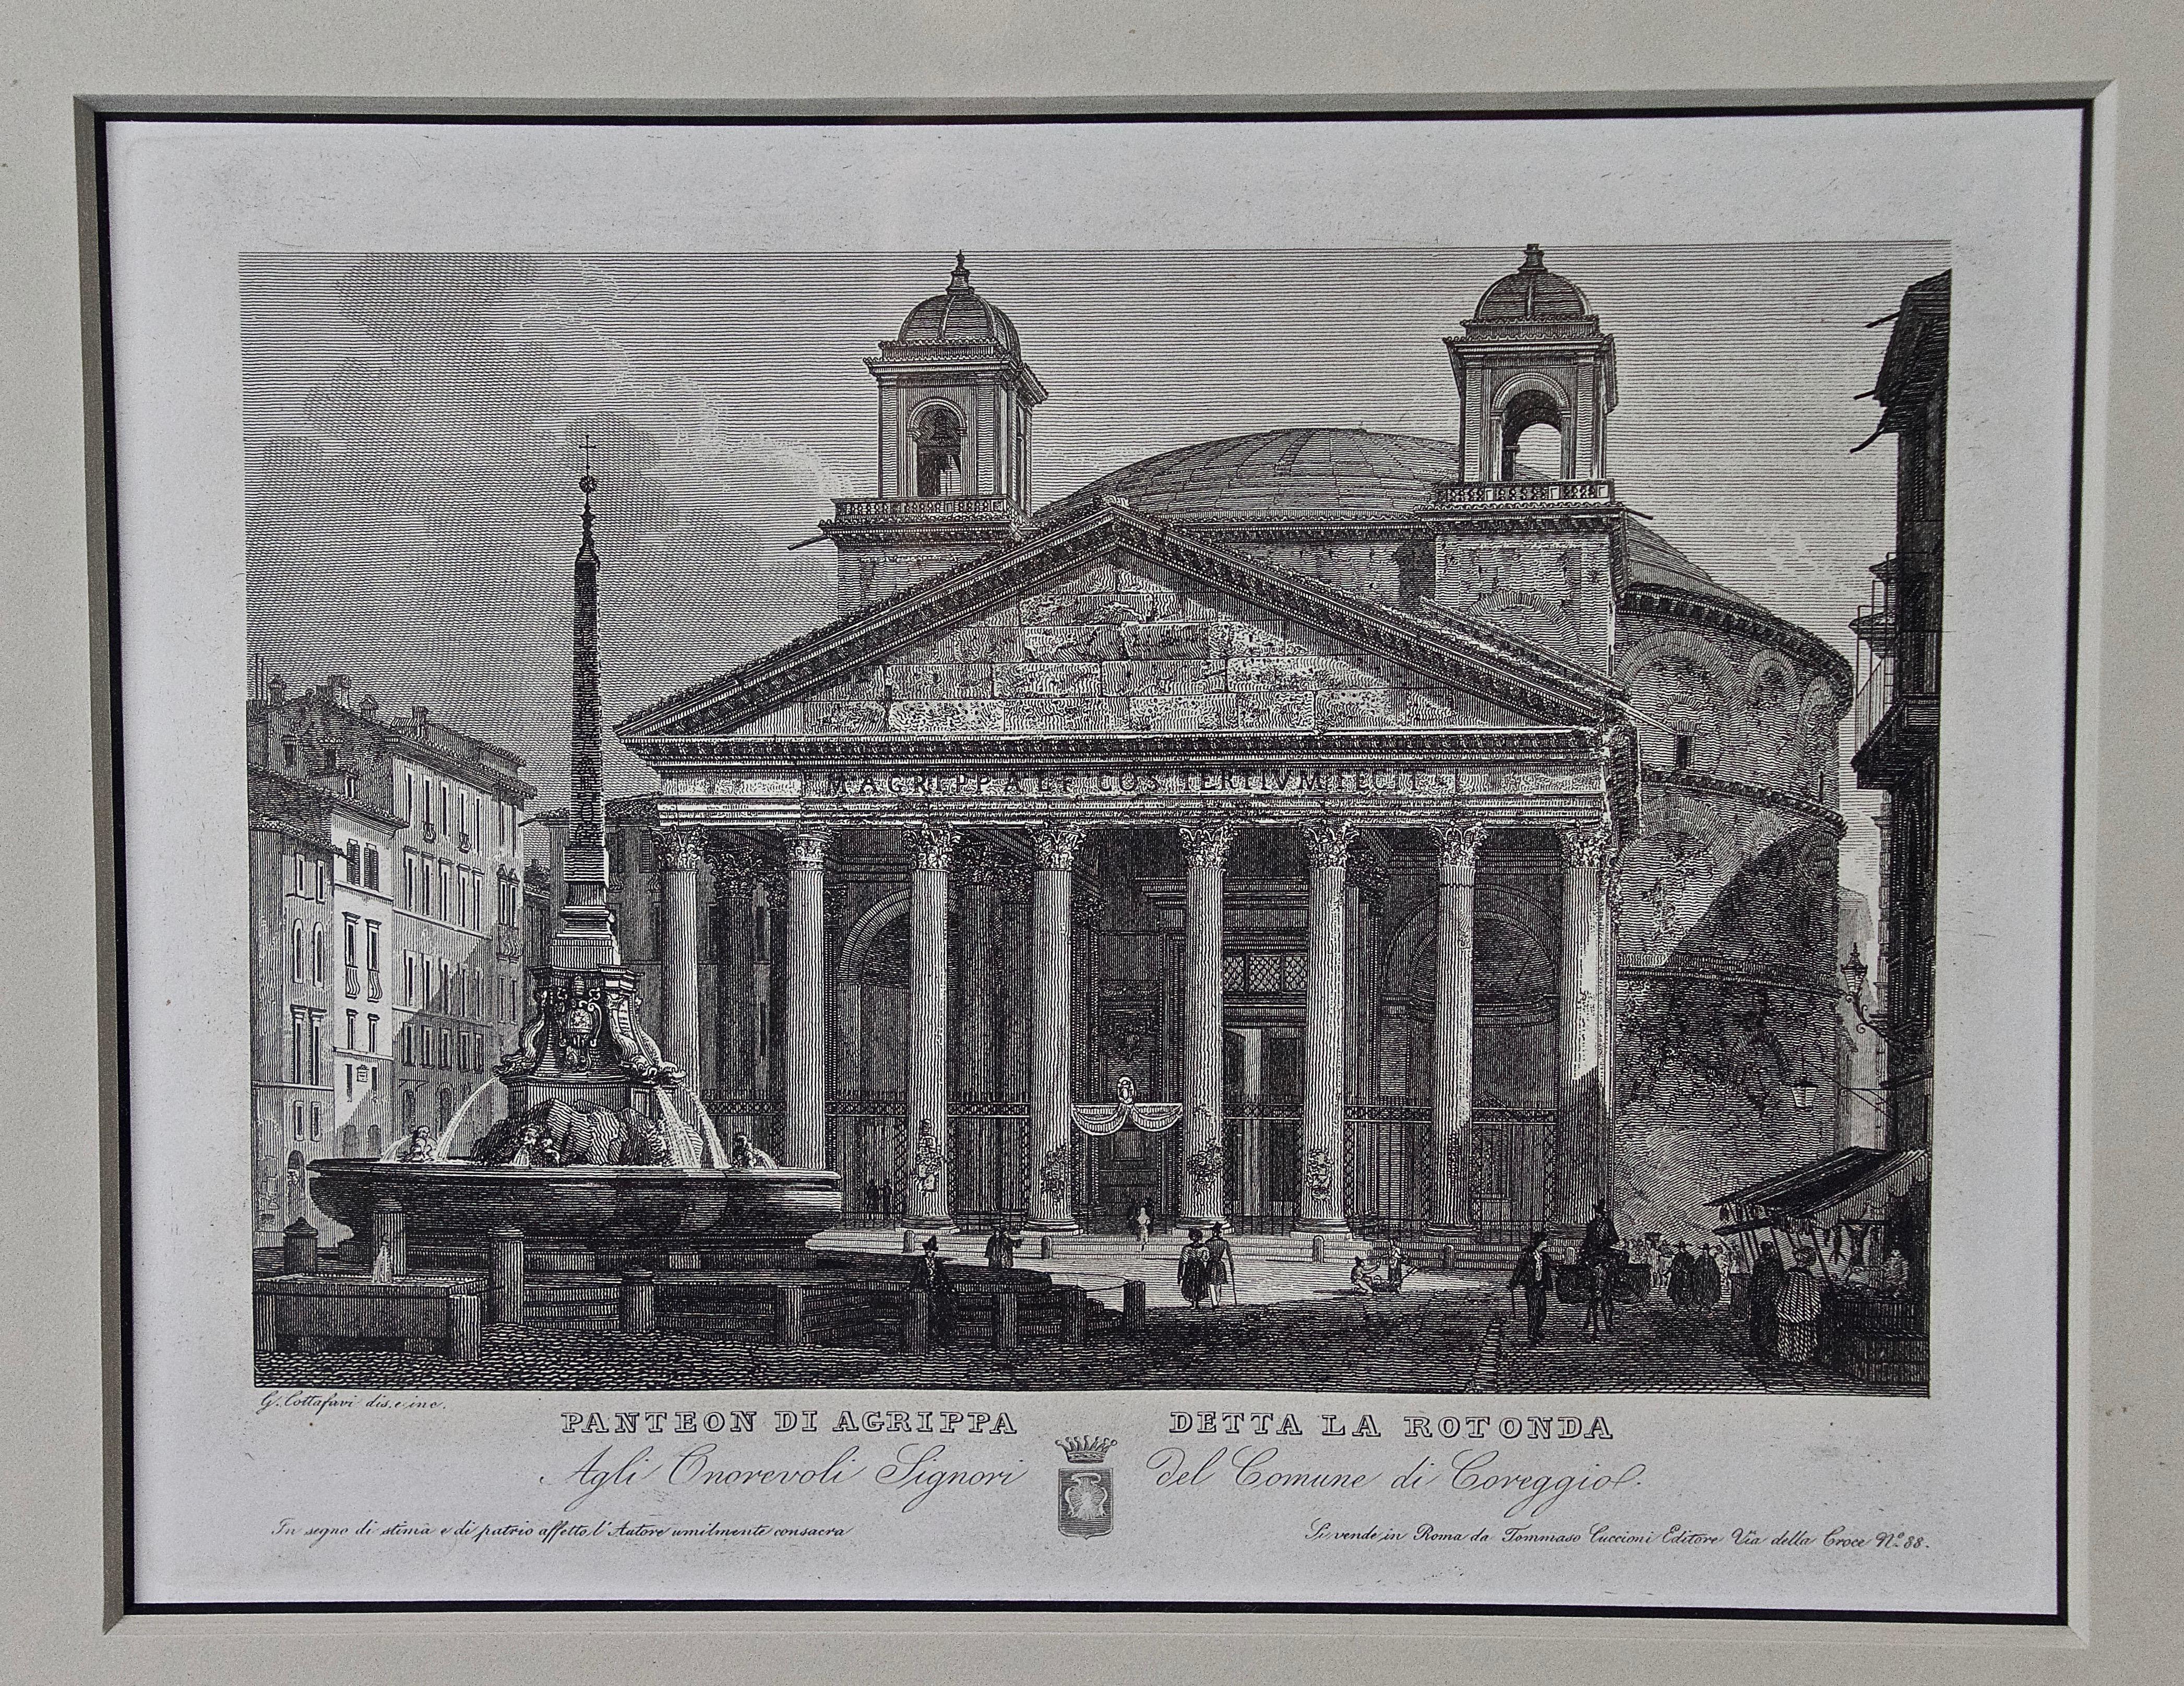 The Pantheon in Rome: A 19th Century Etching by Cottafavi